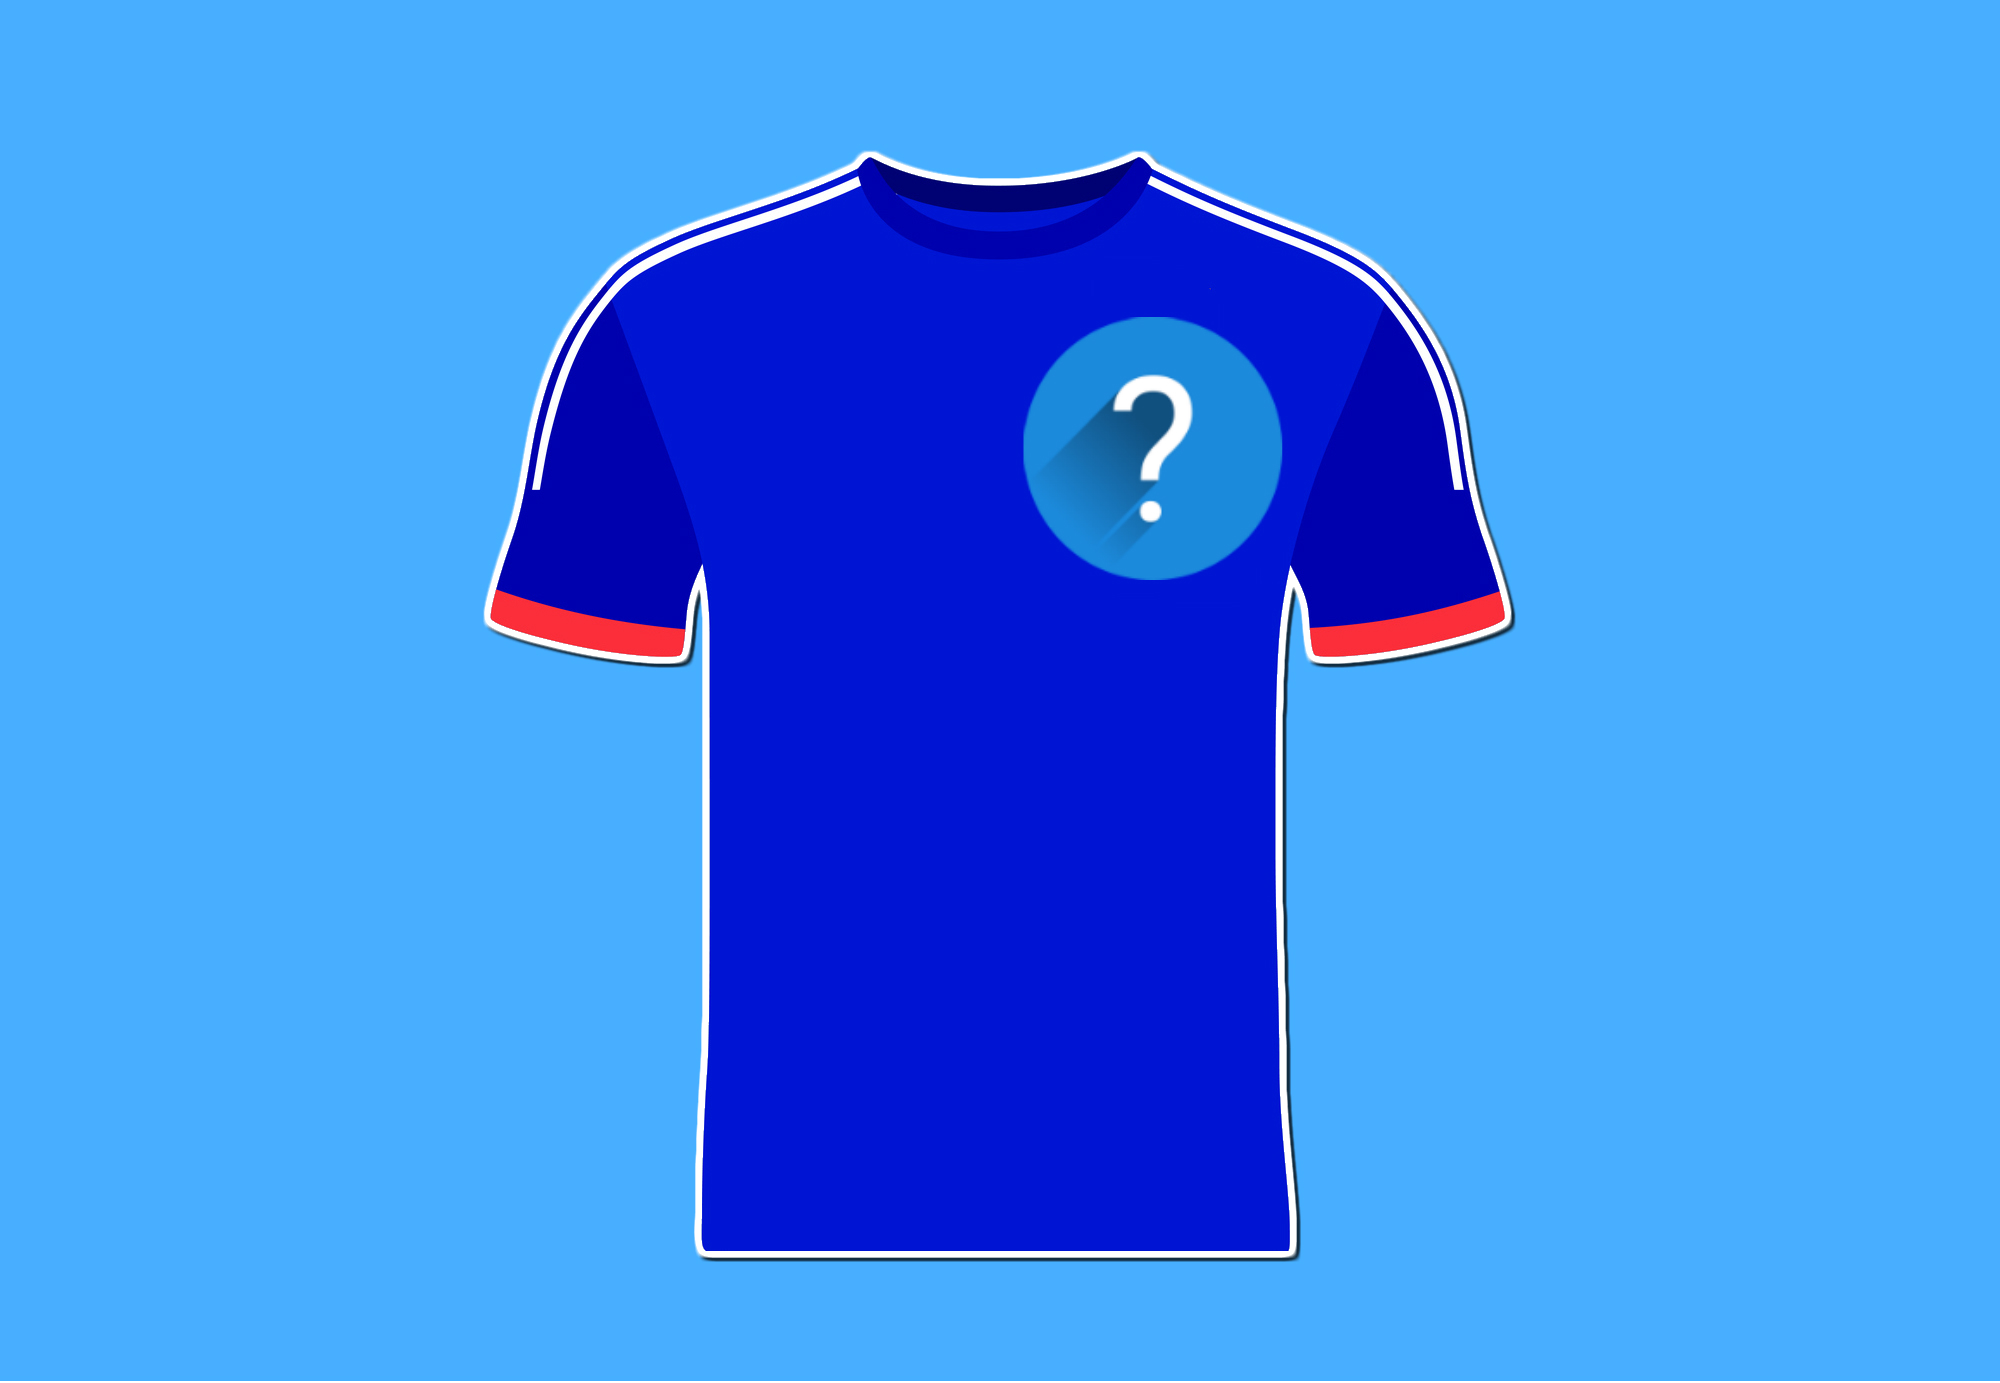 A blue and red football shirt